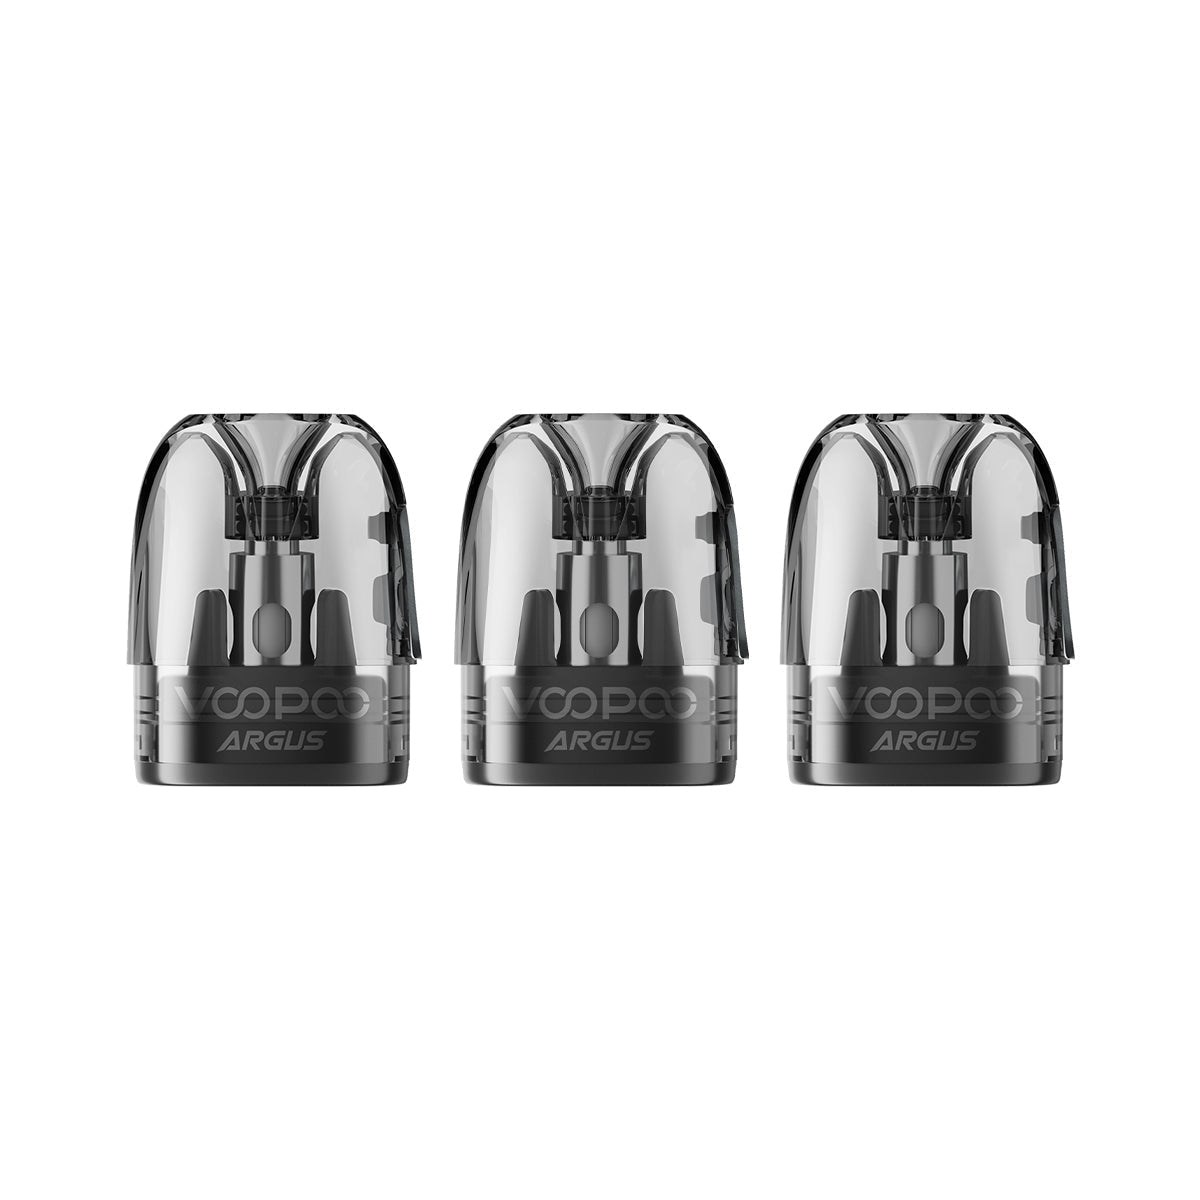 Voopoo Argus Top-Fill Pods (Pack of 3)